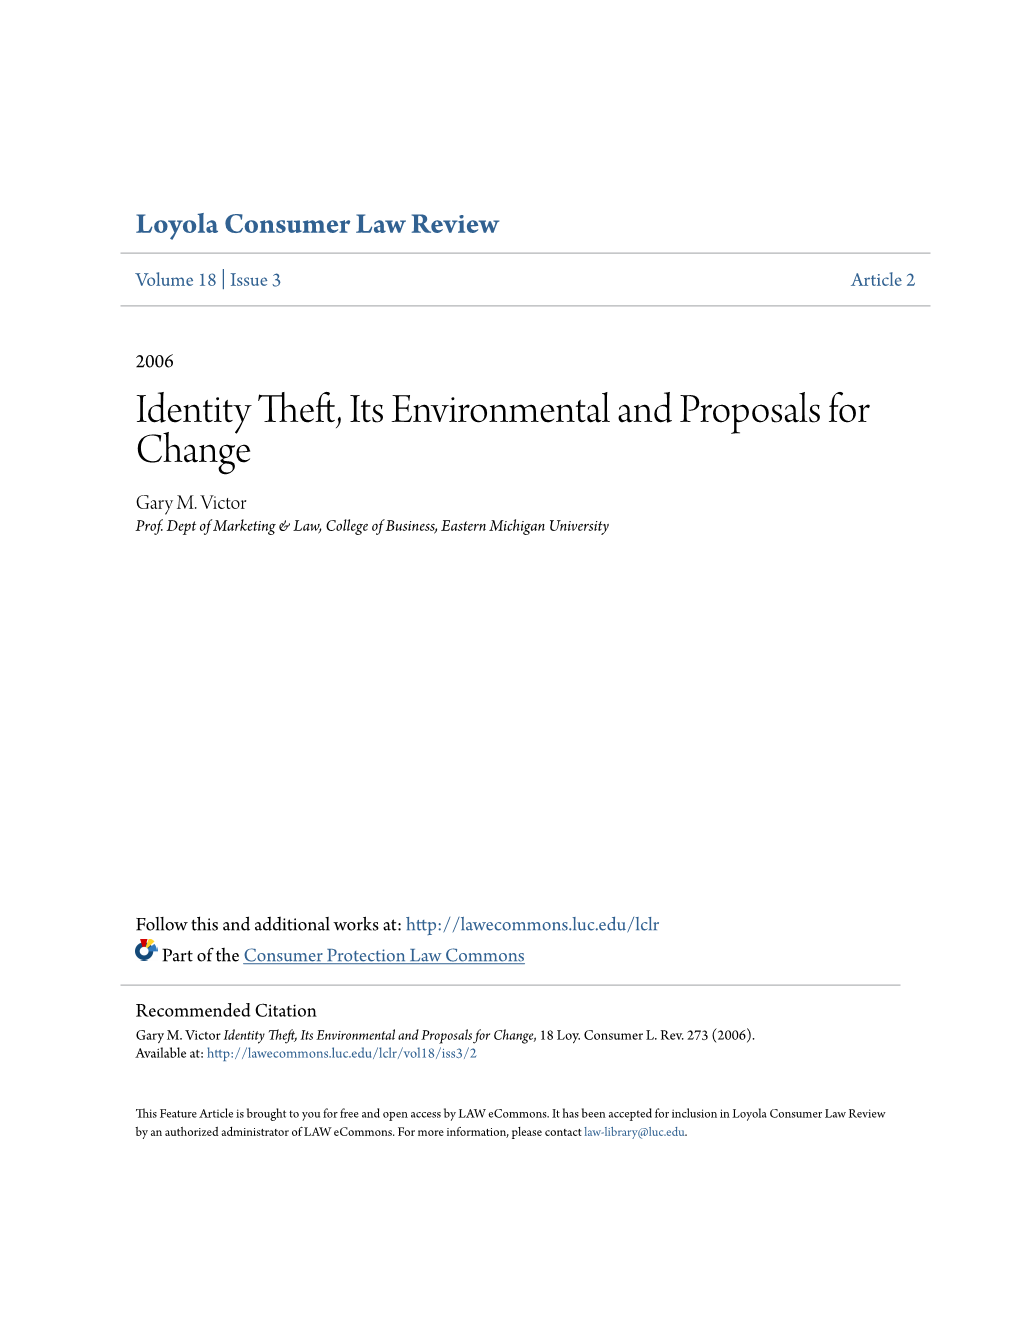 Identity Theft, Its Environmental and Proposals for Change Gary M